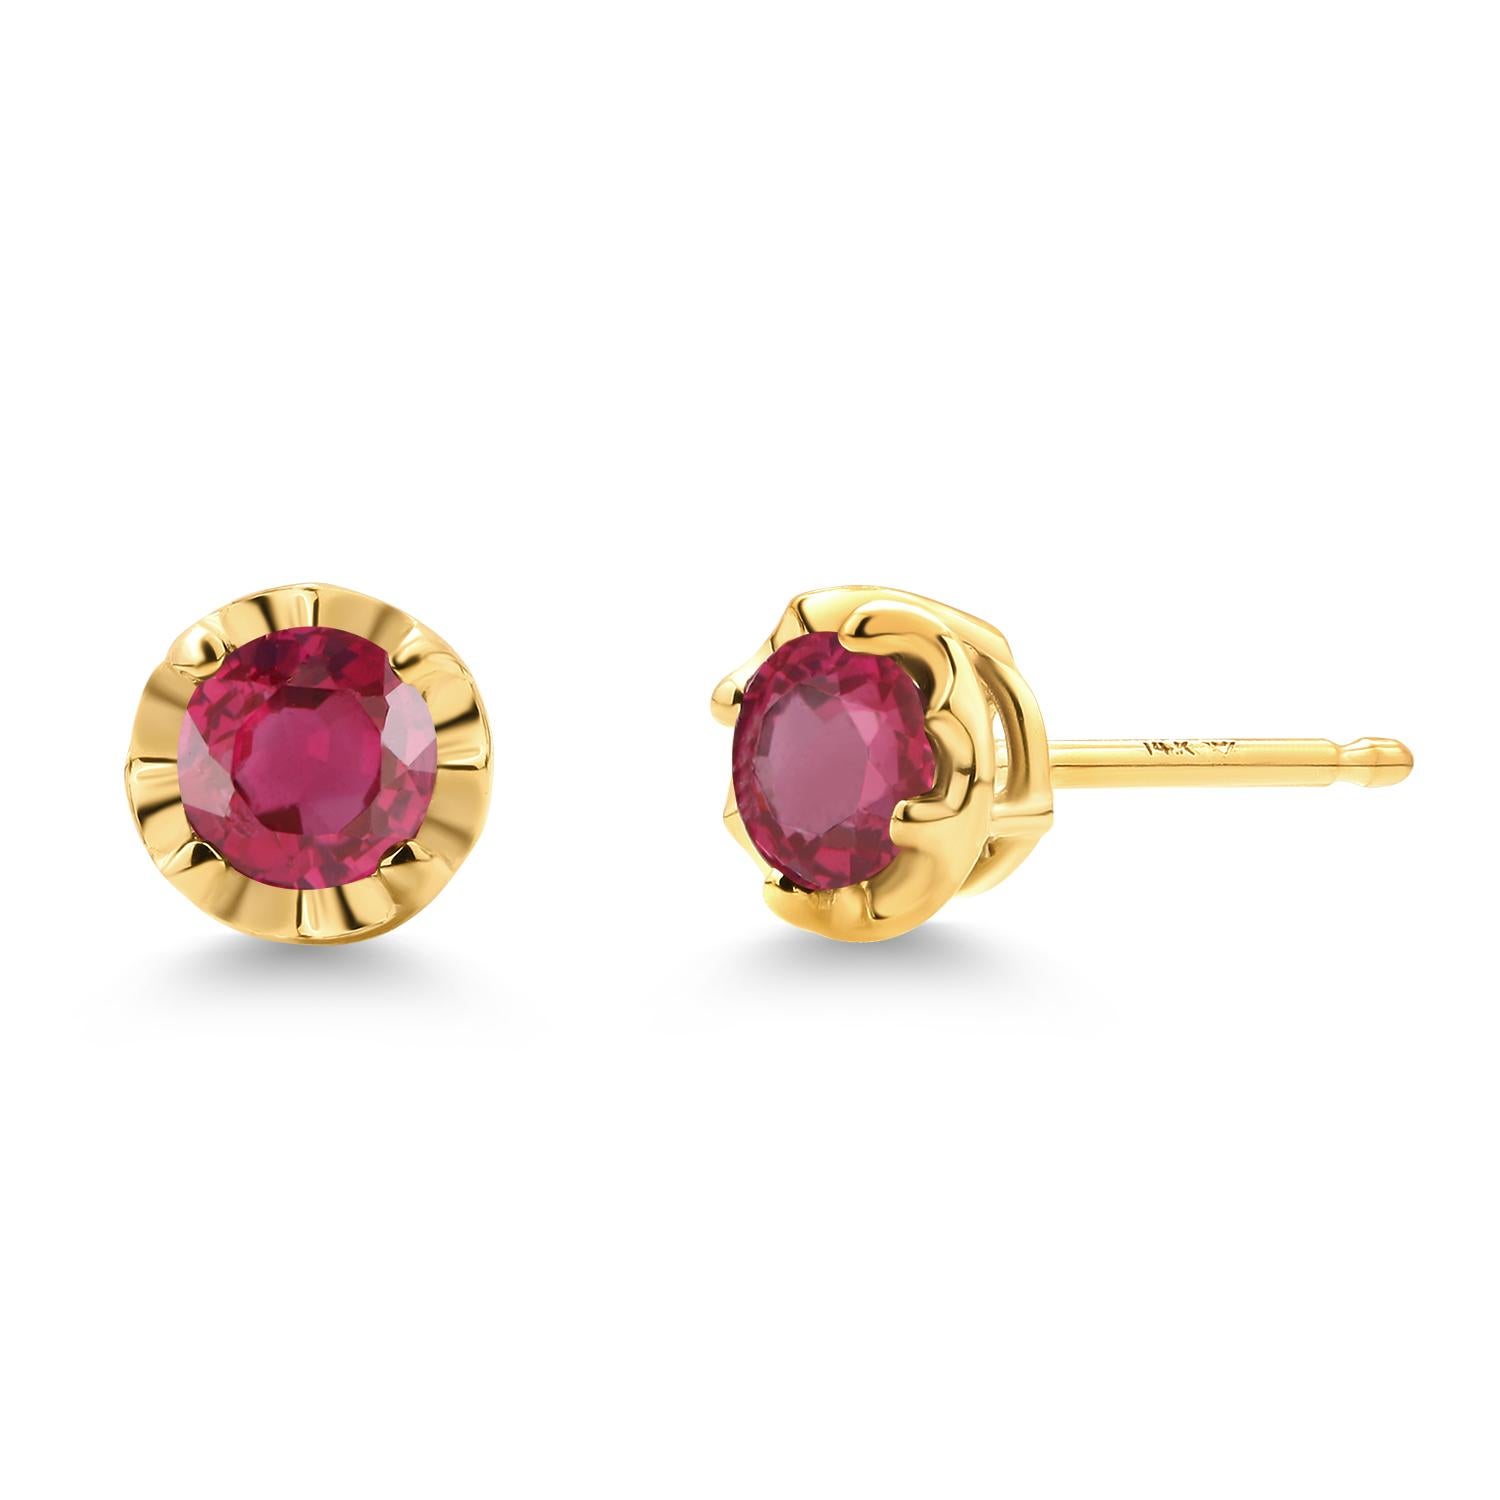 Matched Burma Rubies Weighing 0.60 Carat 0.23 Inch Scalloped Gold Stud Earrings For Sale 1